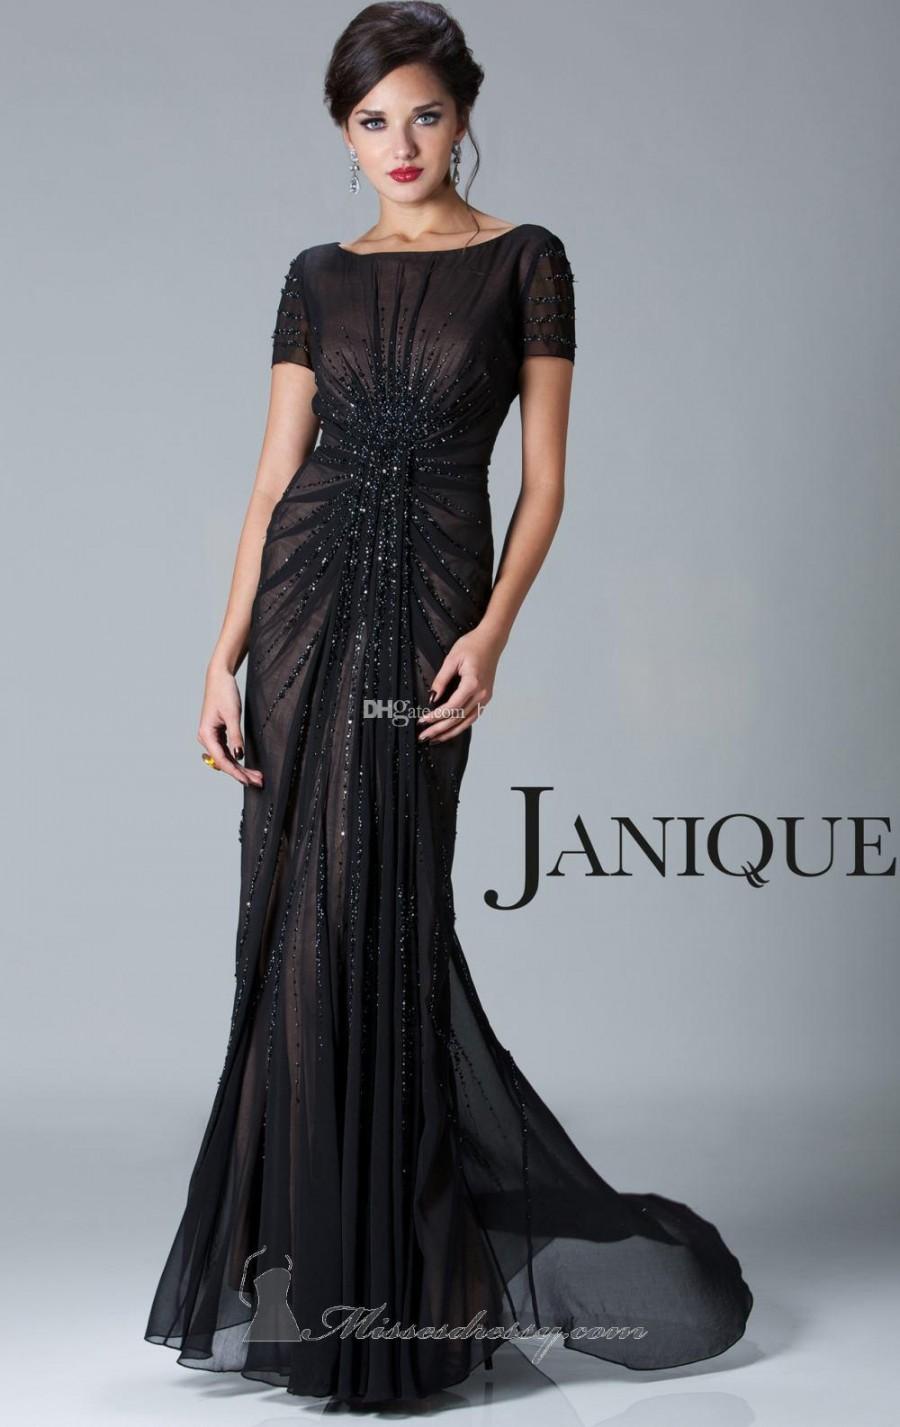 Wedding - Cap Sleeves Gown by Janique 2013 Sexy New Jewel Short Sleeve Crystals Ruffles Chiffon Black Mother Of The Bride Dresses 3302 Online with $140.63/Piece on Hjklp88's Store 